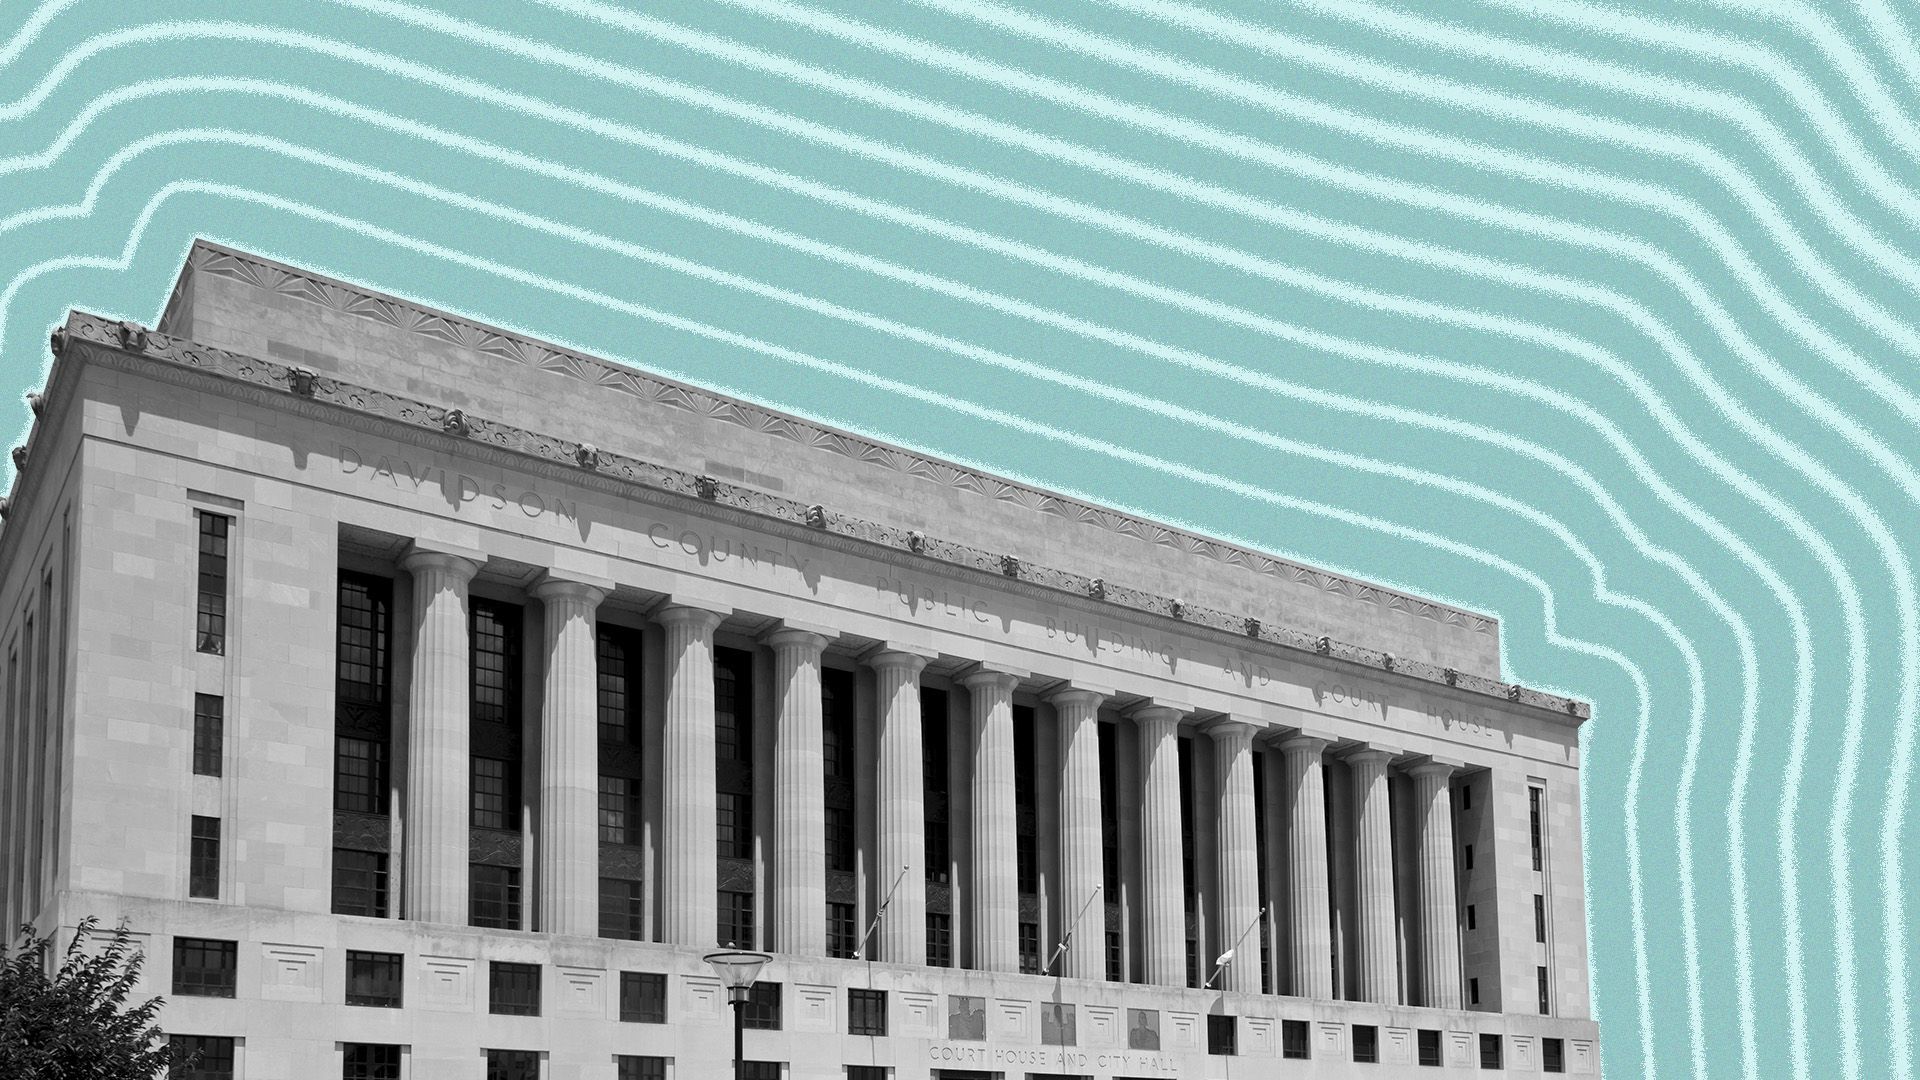 Illustration of Nashville City Hall with lines radiating from it.